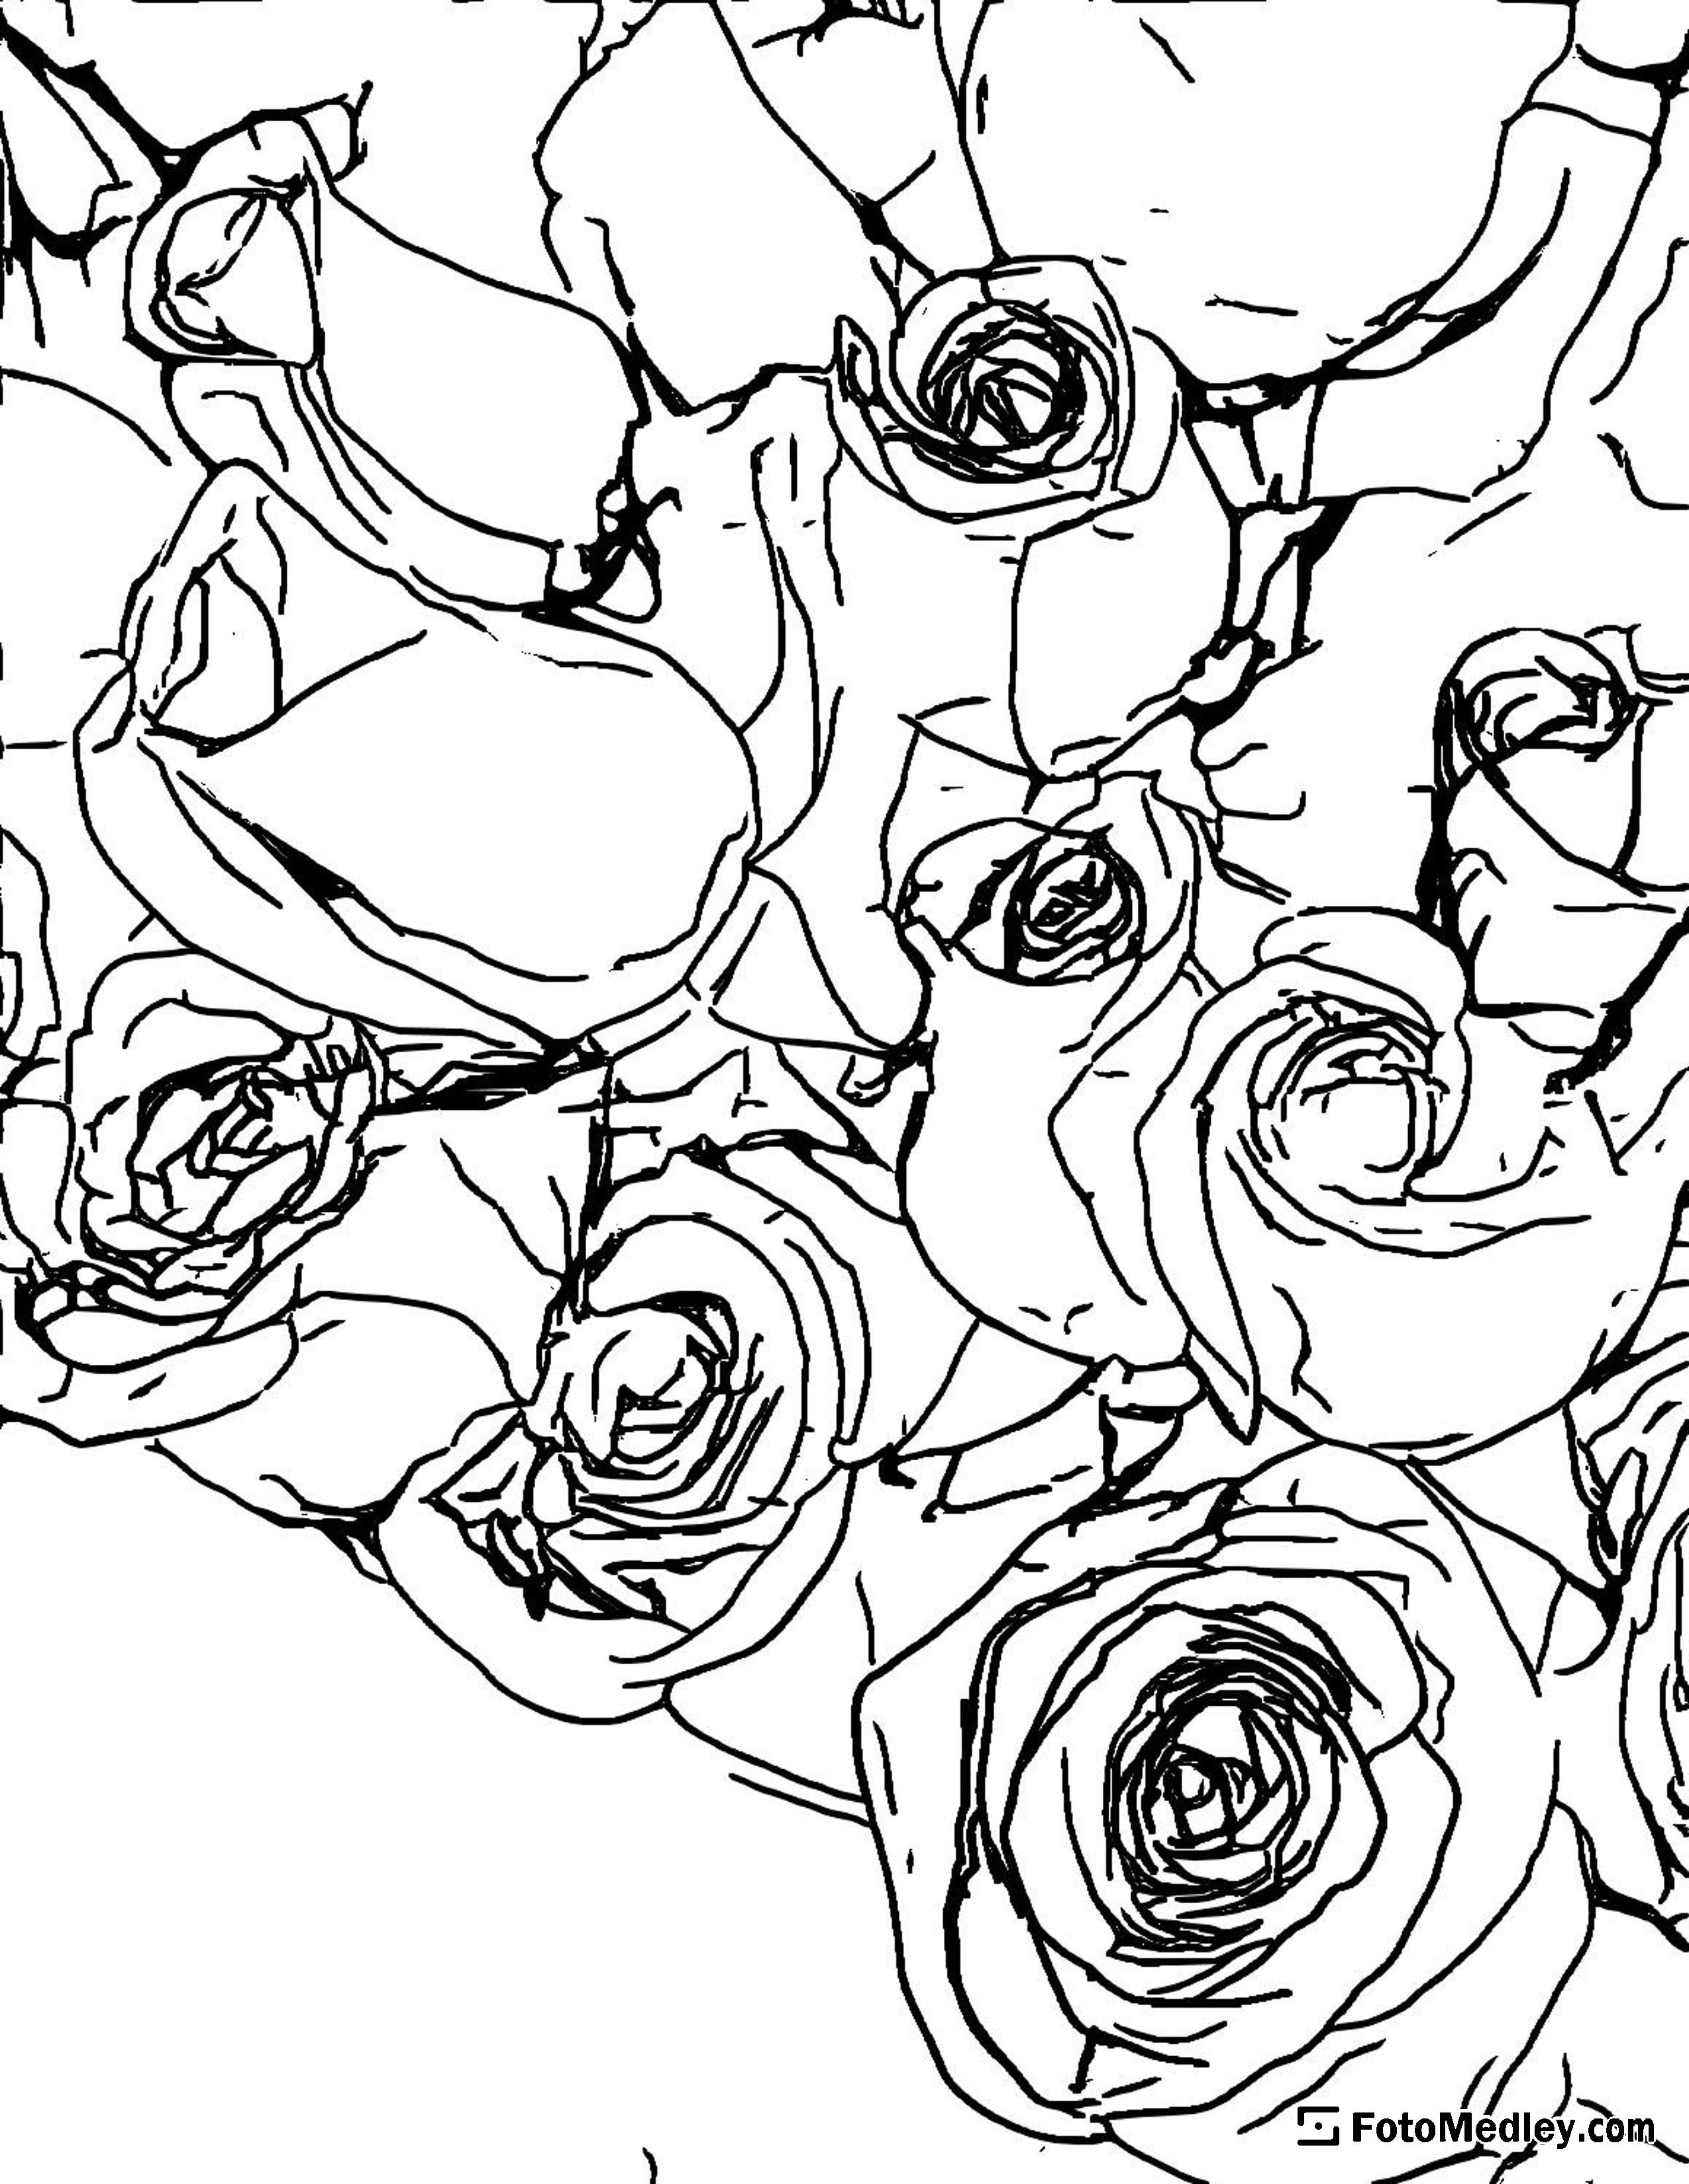 Beautiful roses coloring page for Valentines day